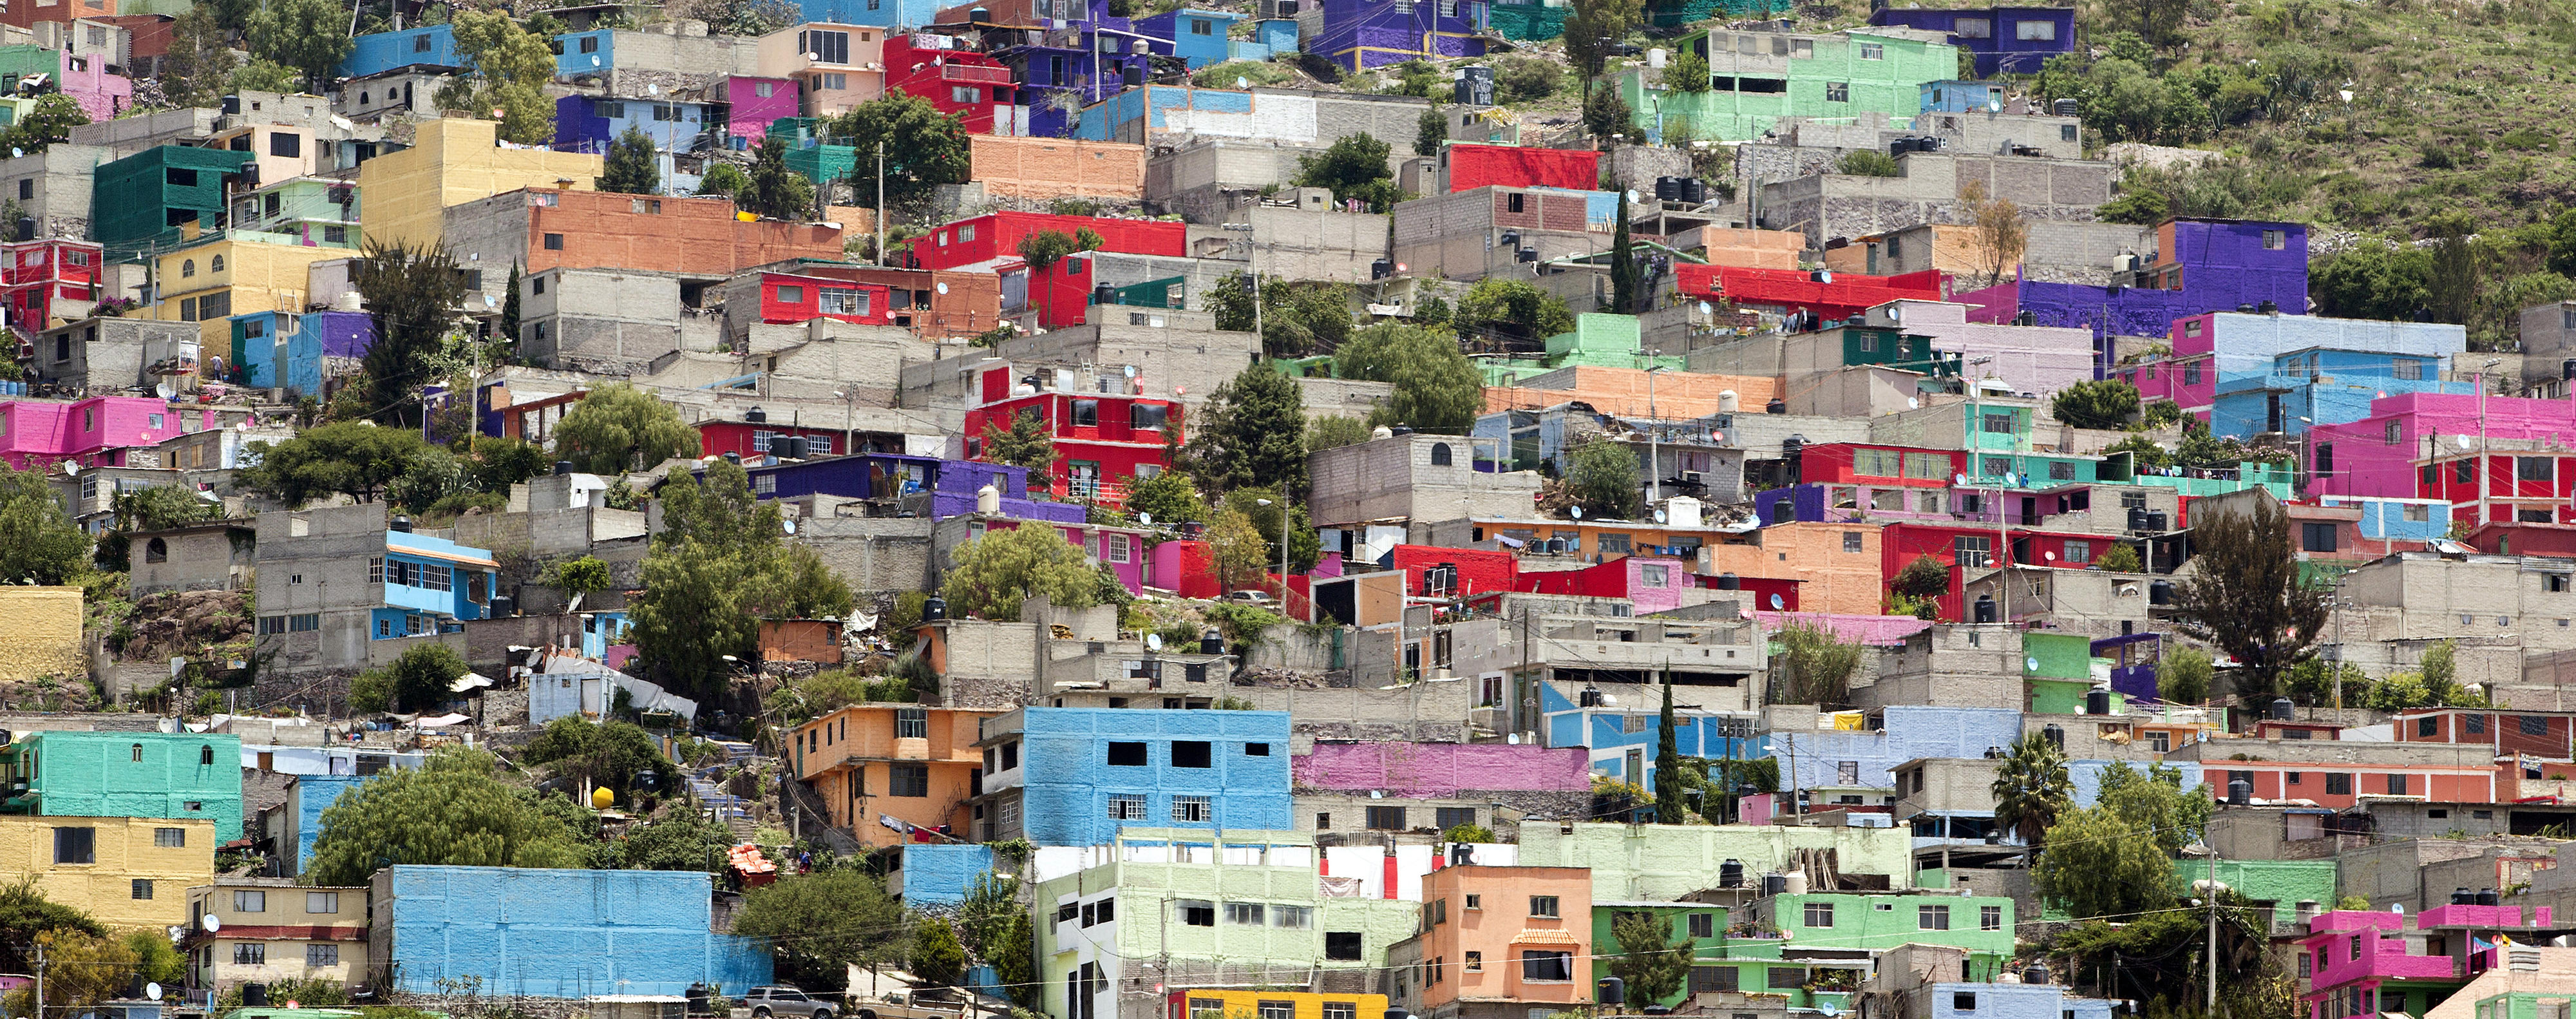 Colorful houses in a suburb of Mexico City